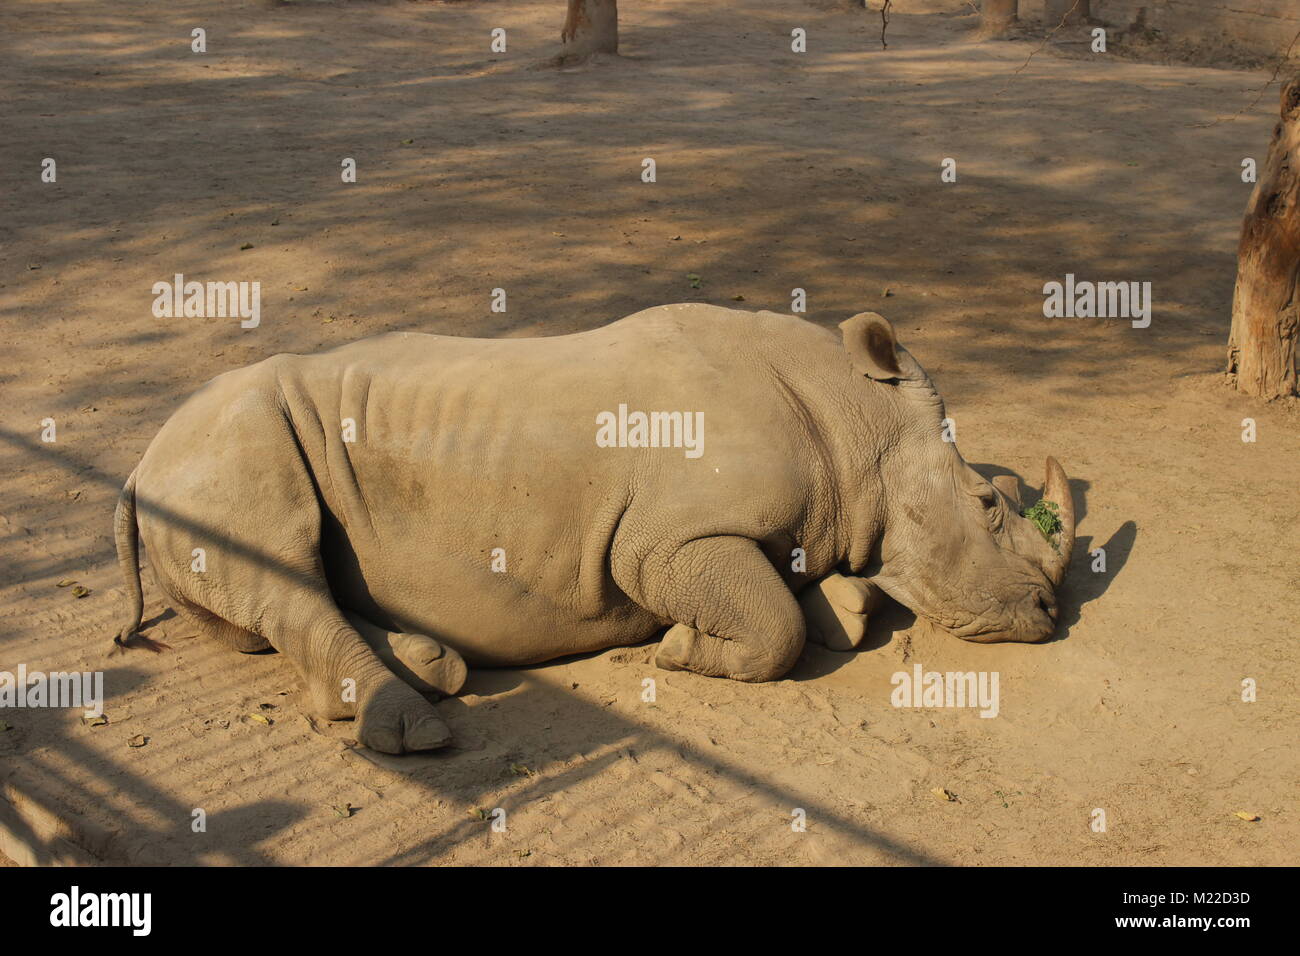 Rhinoceros Laying On Ground With A Bunch Of Leaves And Herbs In The Sun. Stock Photo